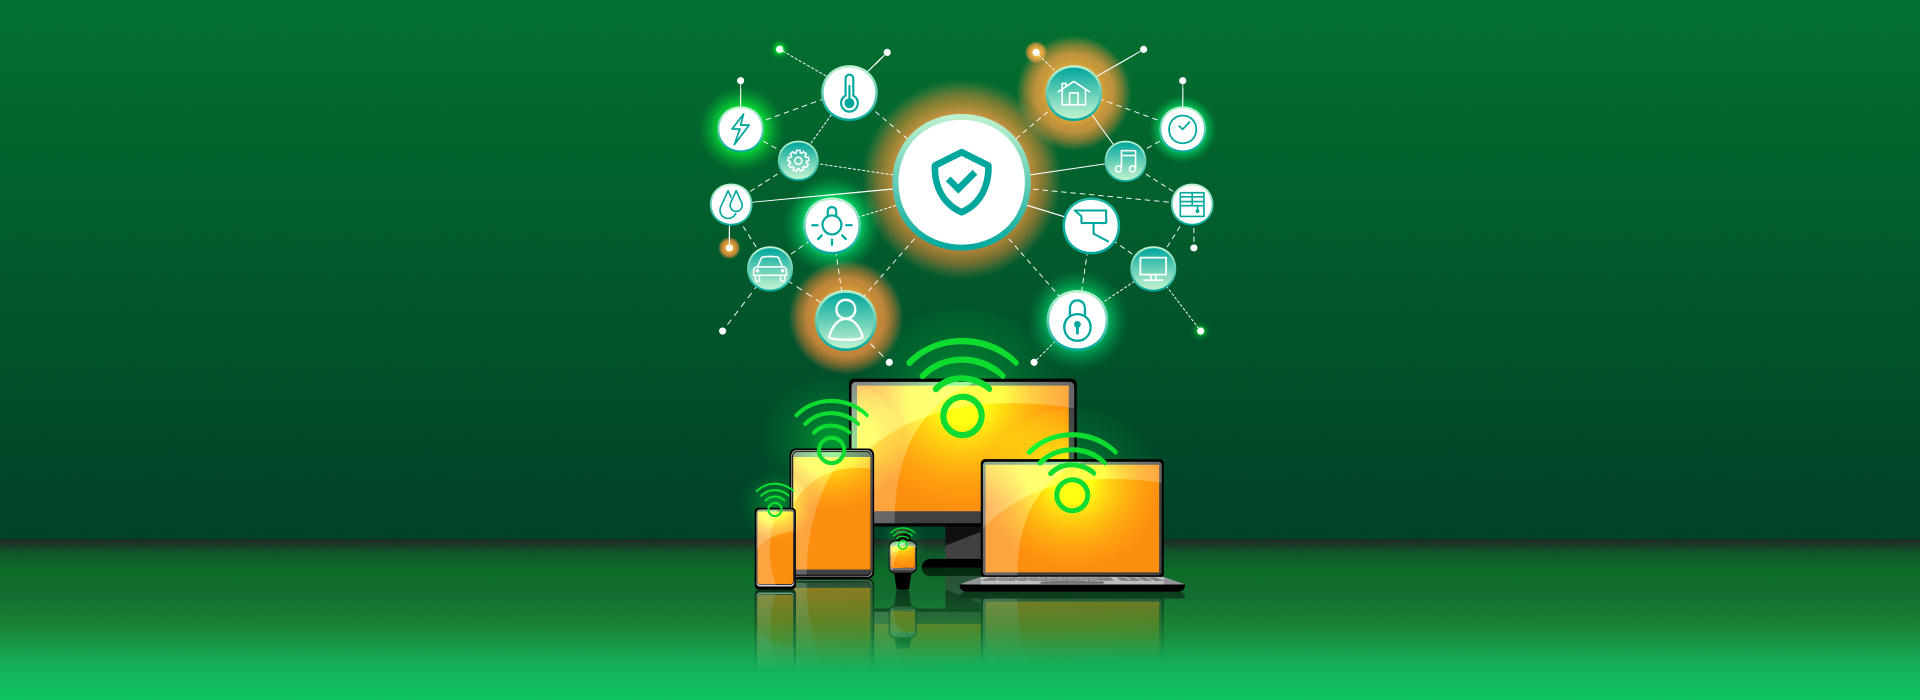 IoT Best Practices for Security